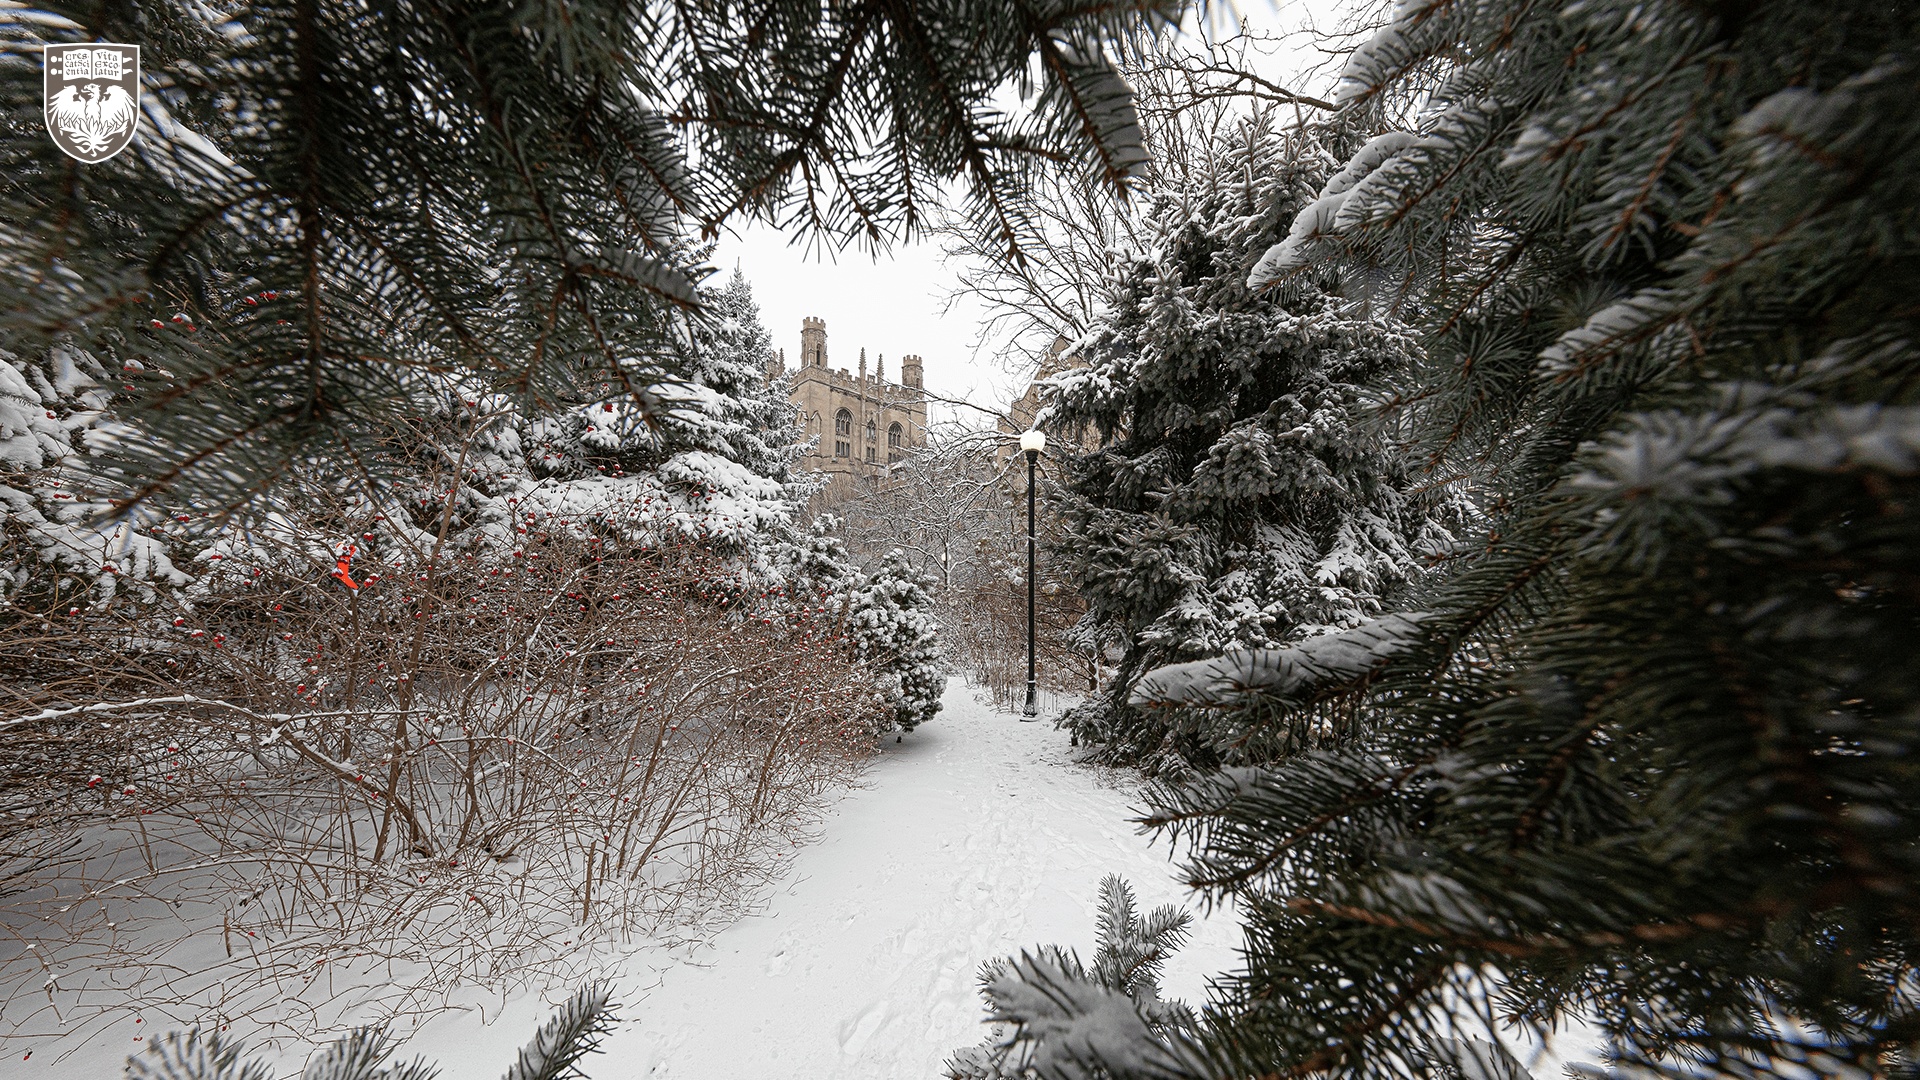 Snowy walkway and pine trees flanking the path